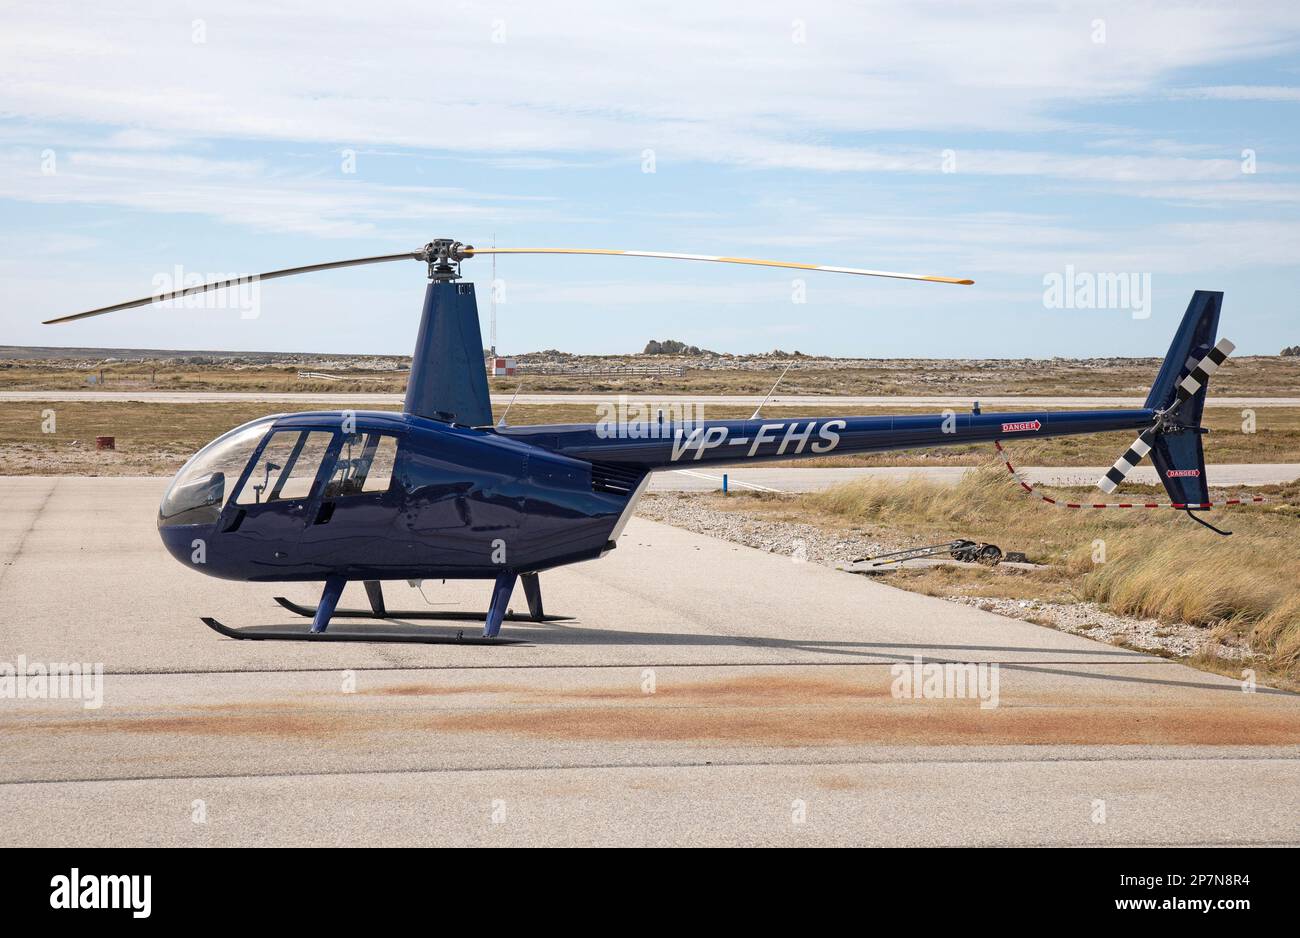 A Robinson R-44 Raven II helicopter, registration number VP-FHS,at Stanley Airport in The Falkland Islands. Stock Photo